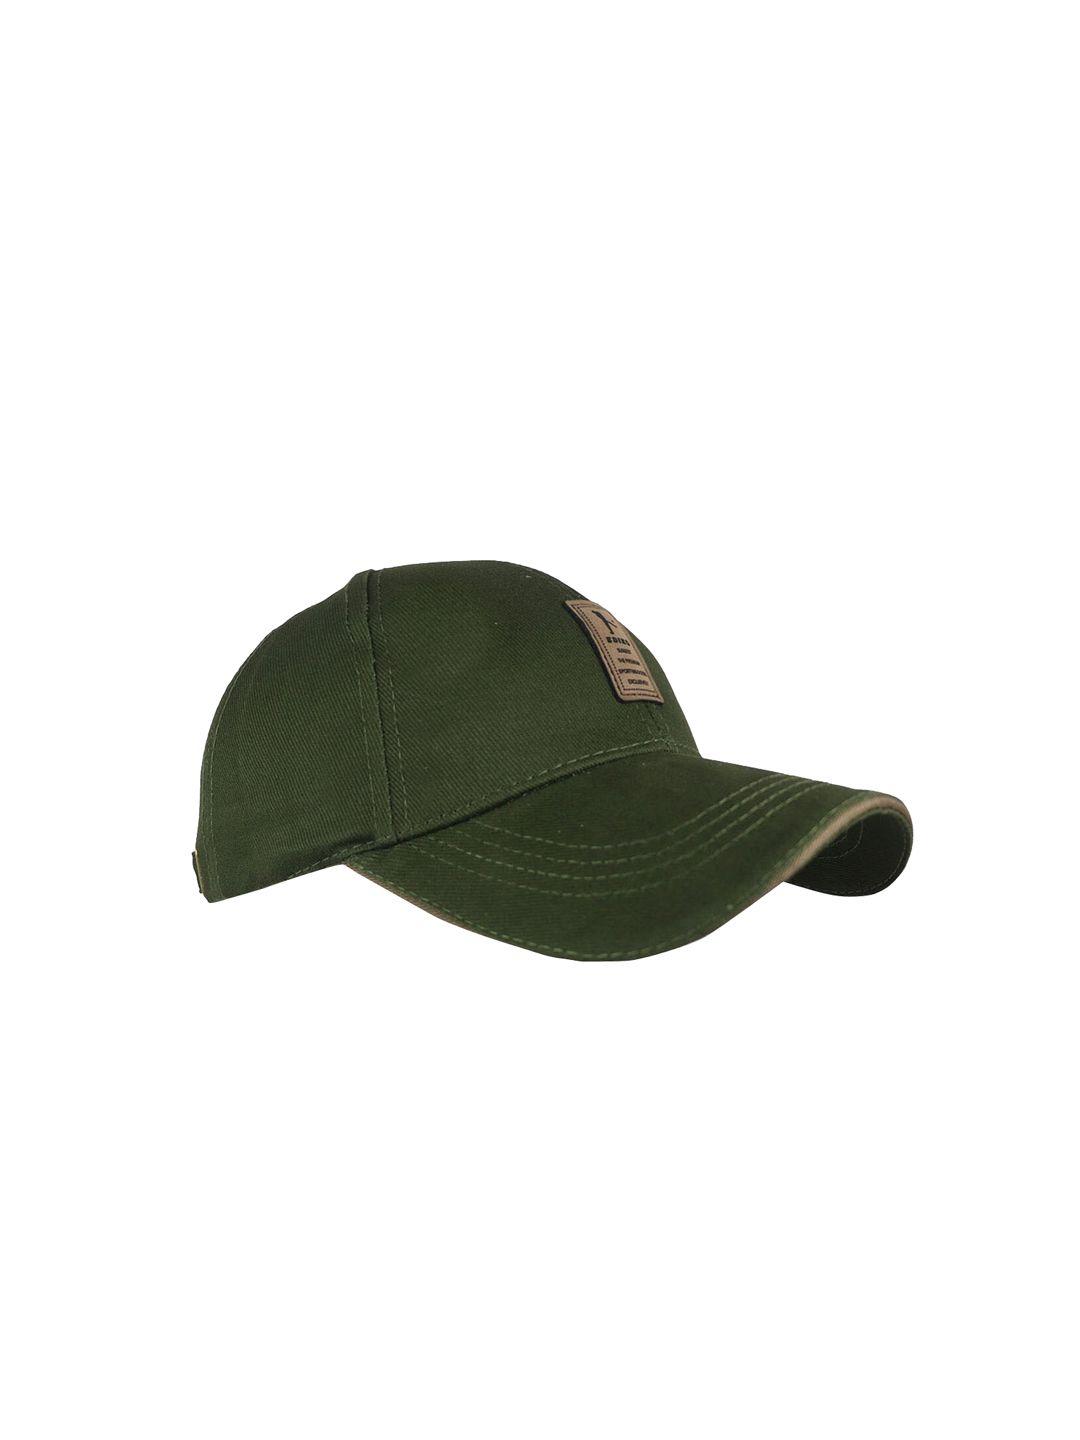 isweven unisex green solid snapback cap